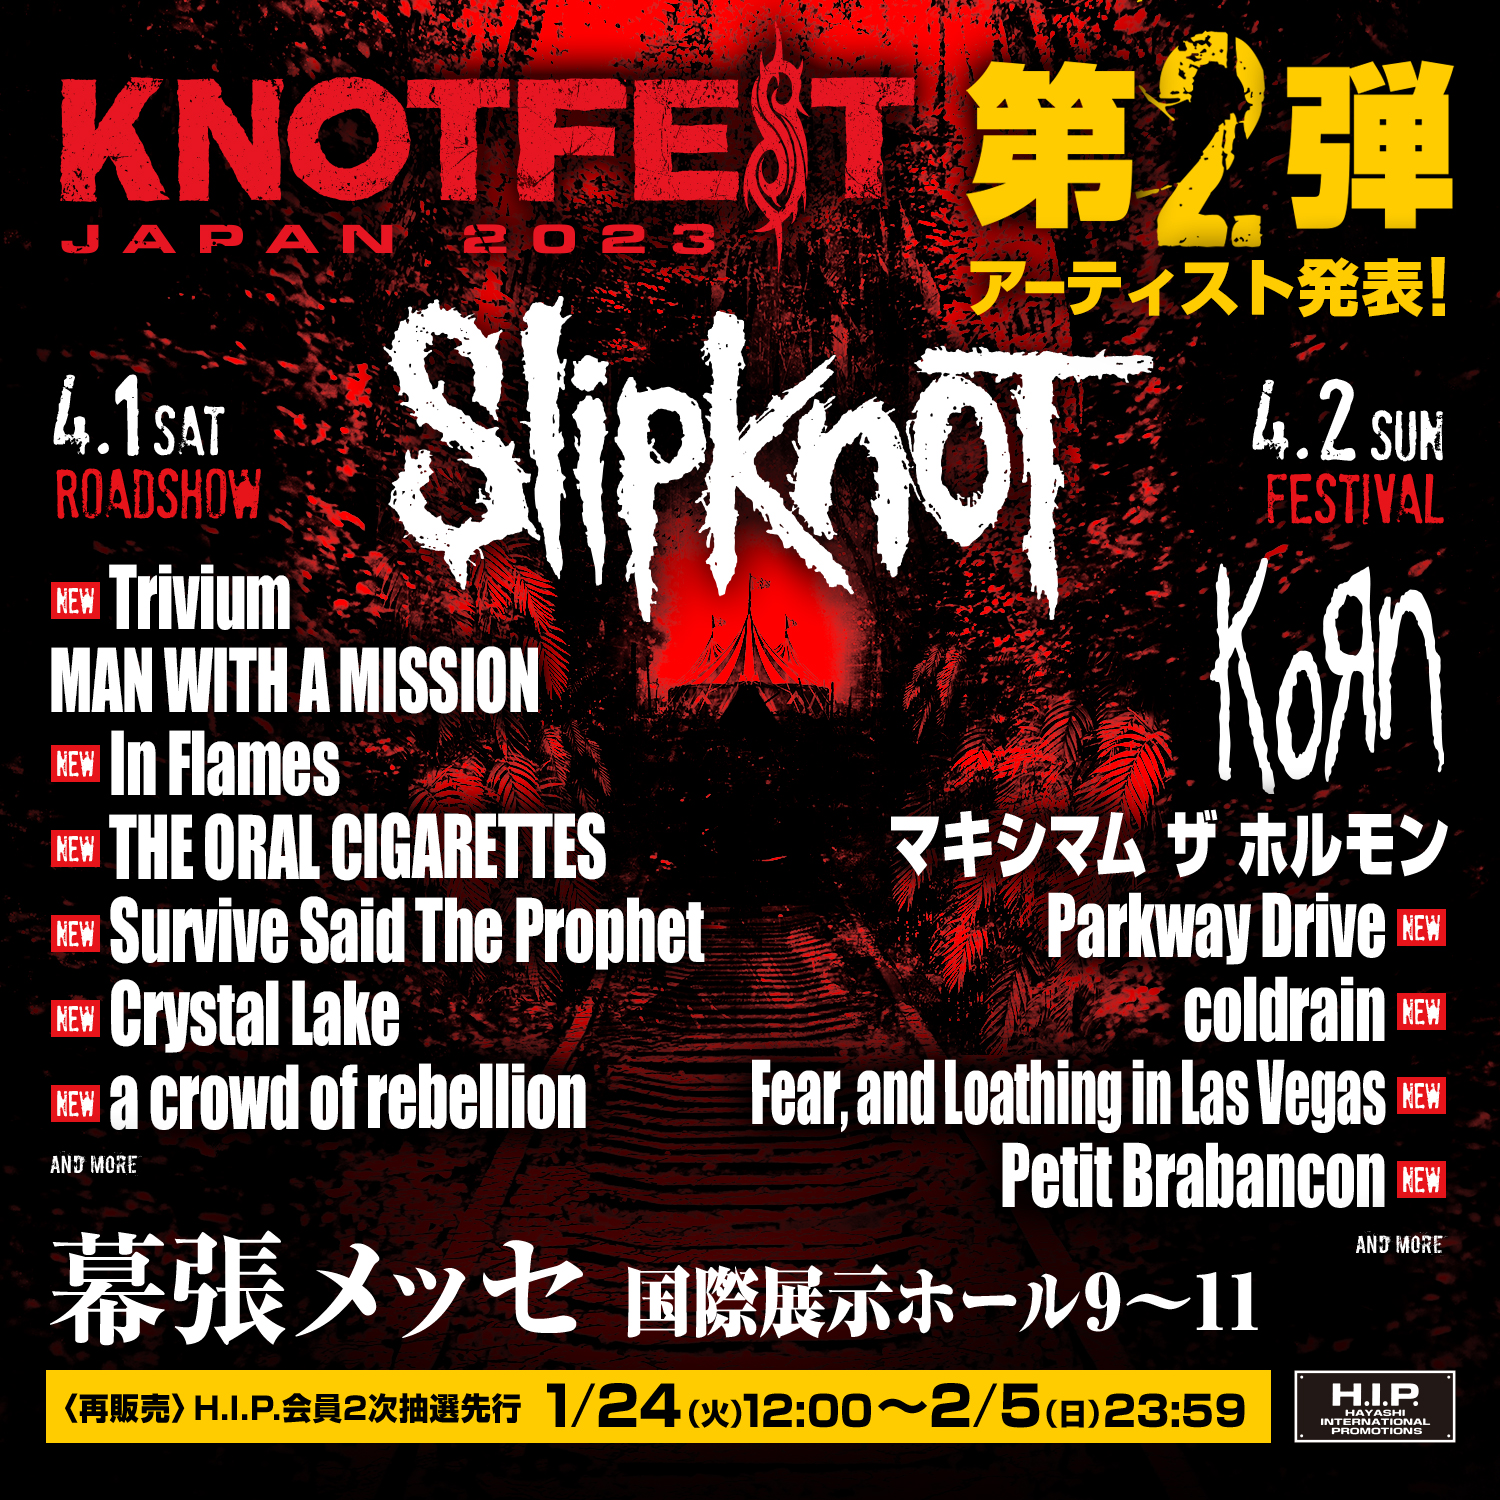 Knotfest Square Flyer